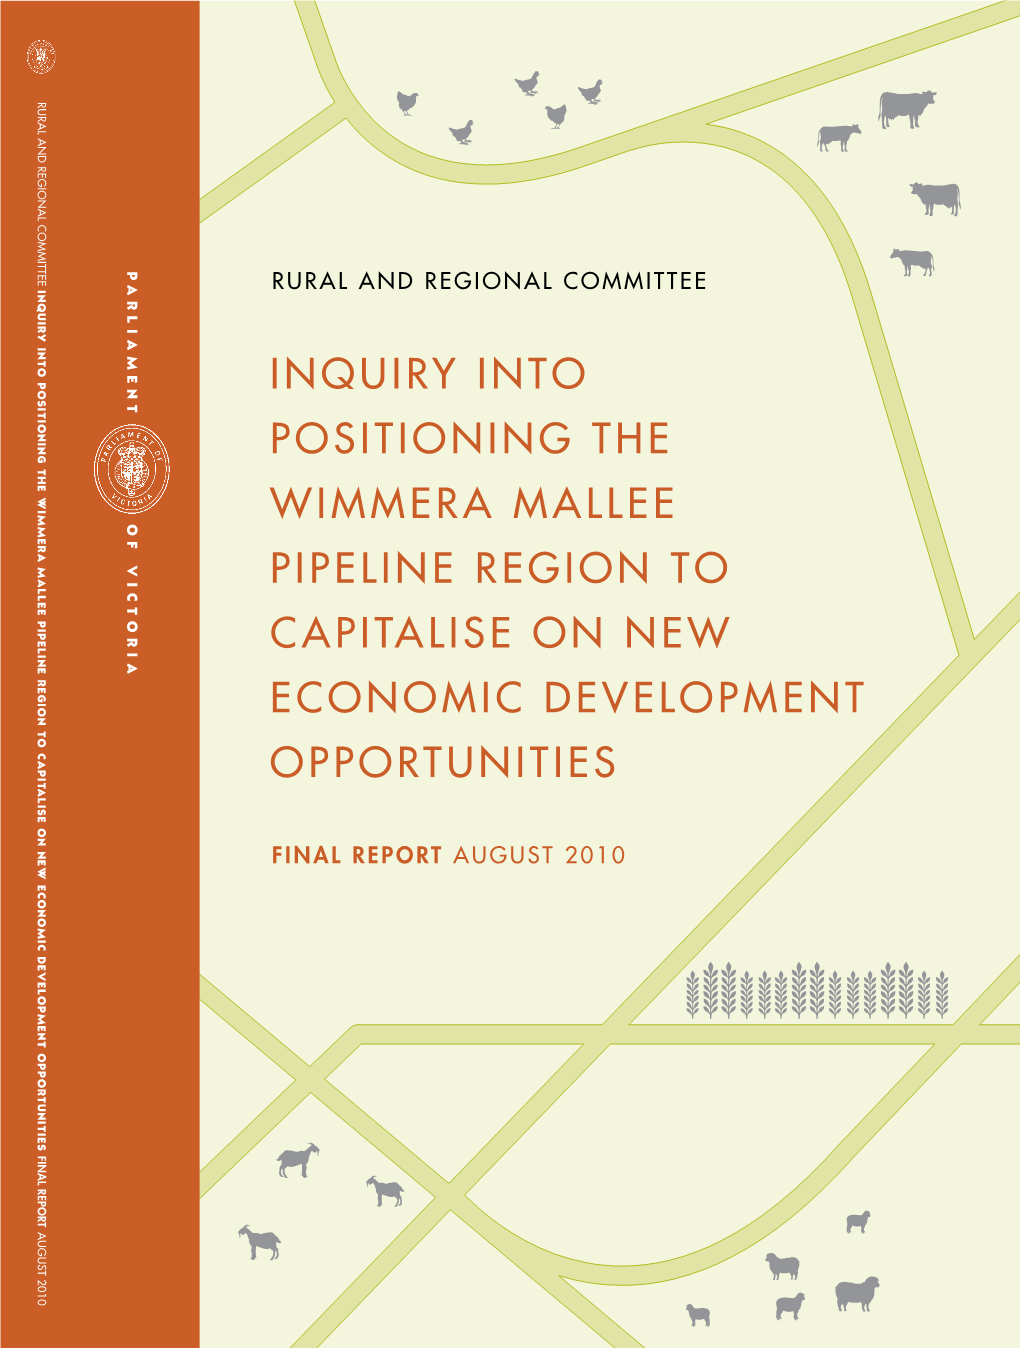 Inquiry Into Positioning the Wimmera Mallee Pipeline Region to Capitalise on New Economic Development Opportunities